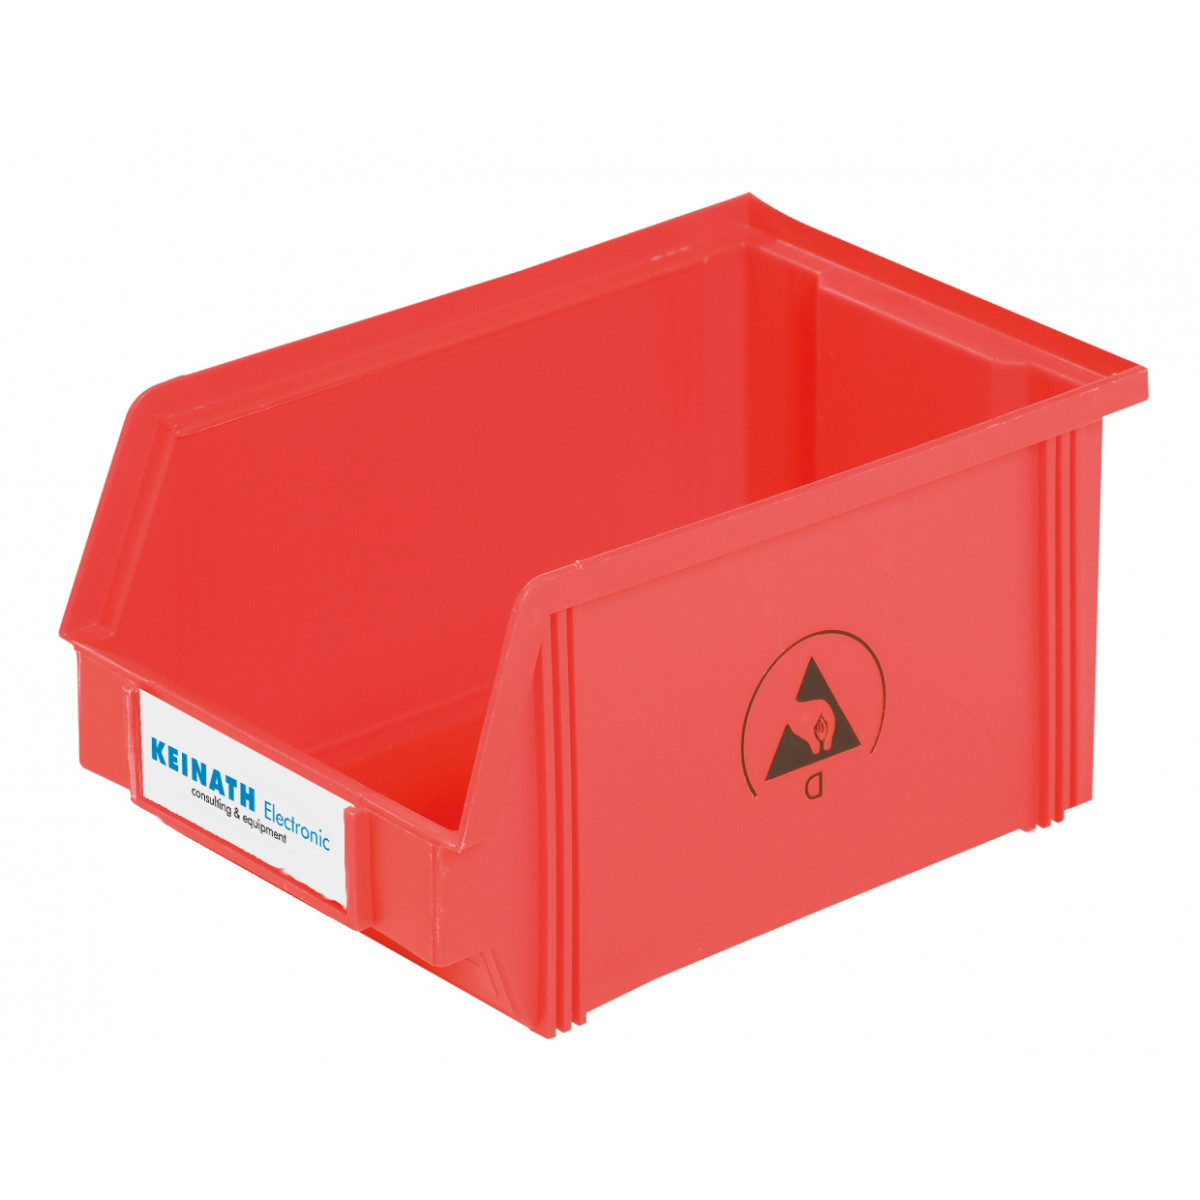 Identification labels for open fronted storage bins